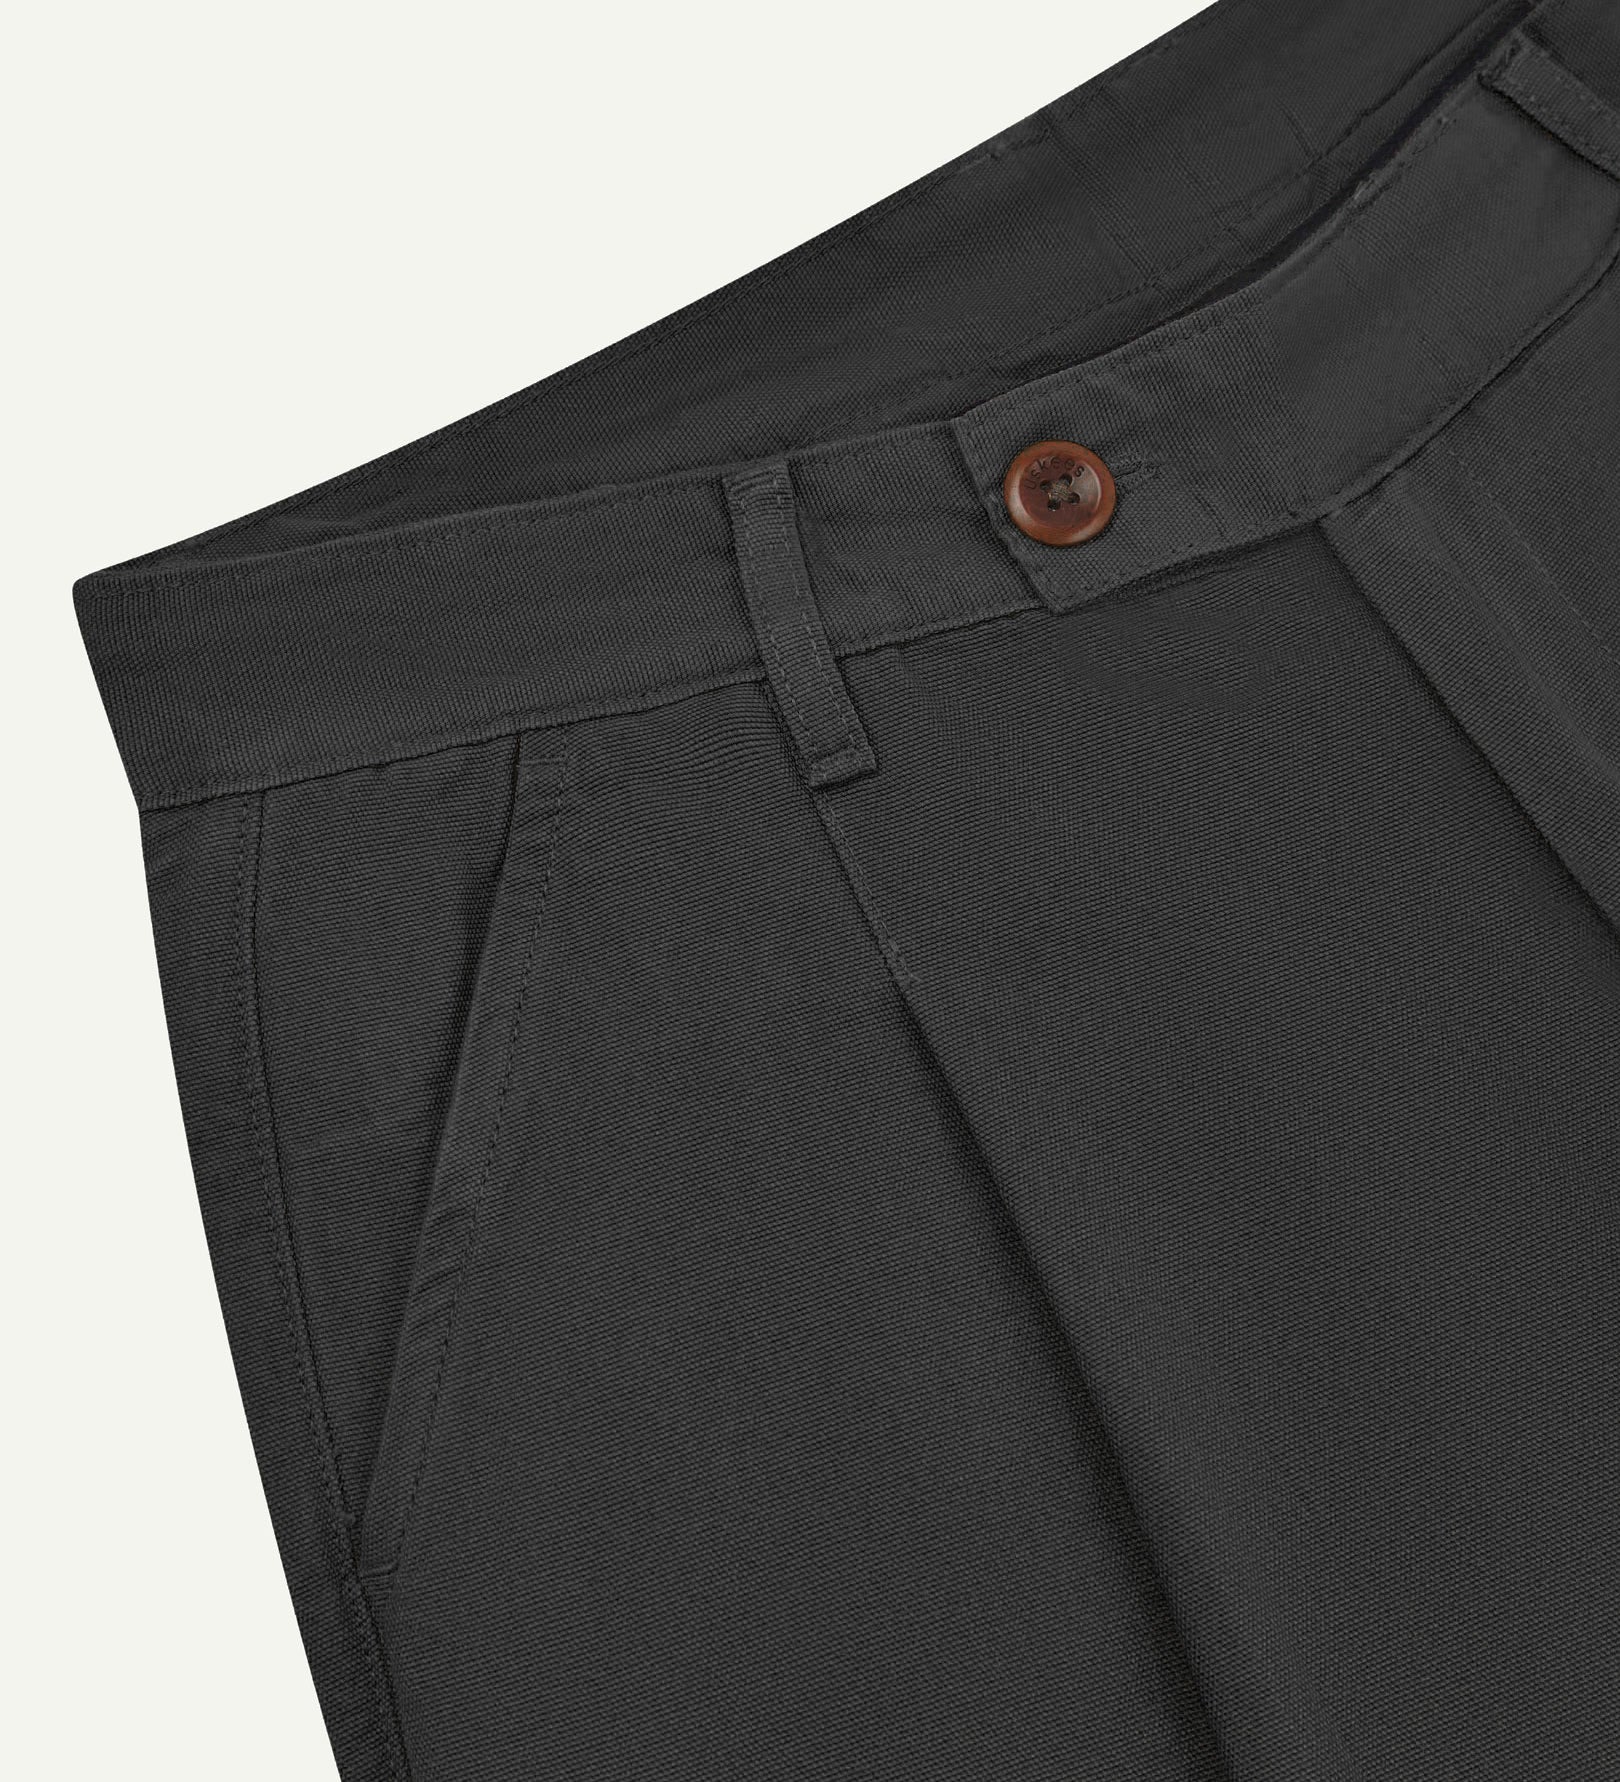 Front close-up shot of 5018 Uskees men's organic mid-weight cotton boat trousers in charcoal grey showing corozo button fastening at waistband, belt loops and front pocket.